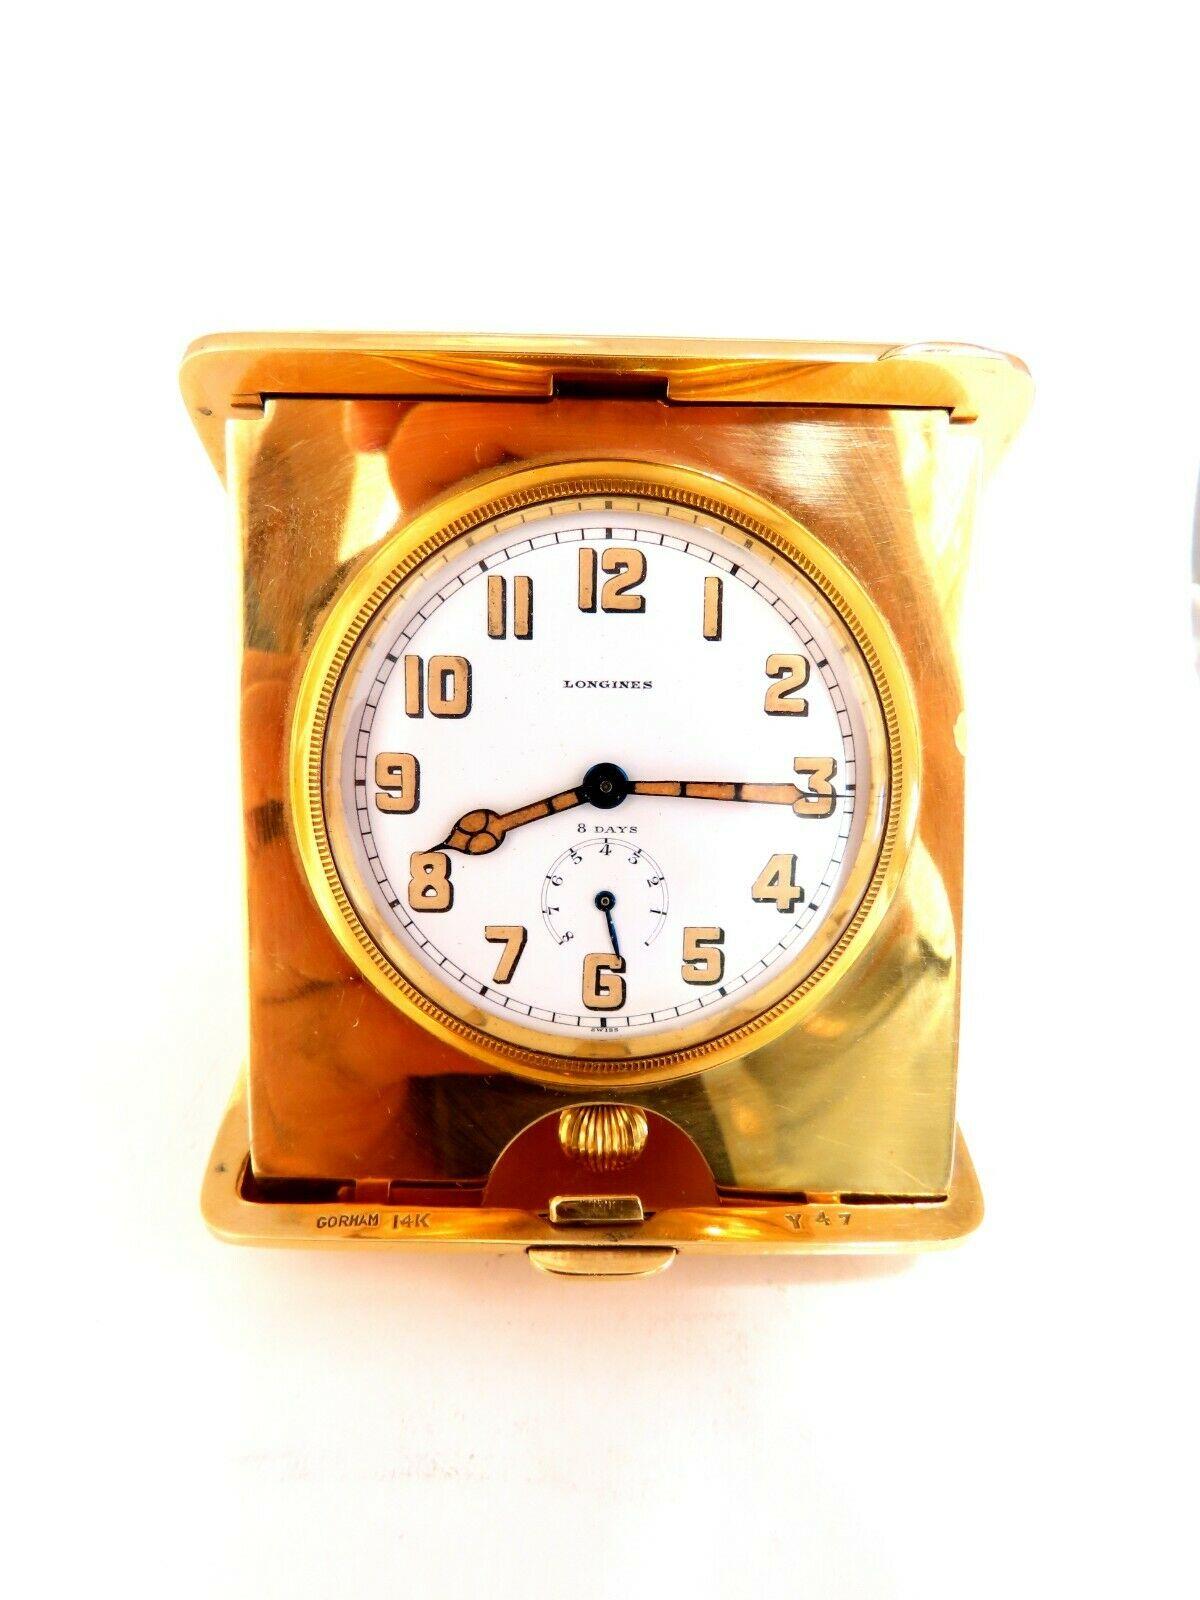 Gorham for Longines

8 Day Power Reserve Portable Desk Clock

Will Fit to pocket, 8 Day winding

Working and tested

Case has been designed by Gorham

14kt. Yellow gold 

248 grams.

3.3 x 2.9 inch
Depth: .9 inch
56mm dial


Please see engraving on